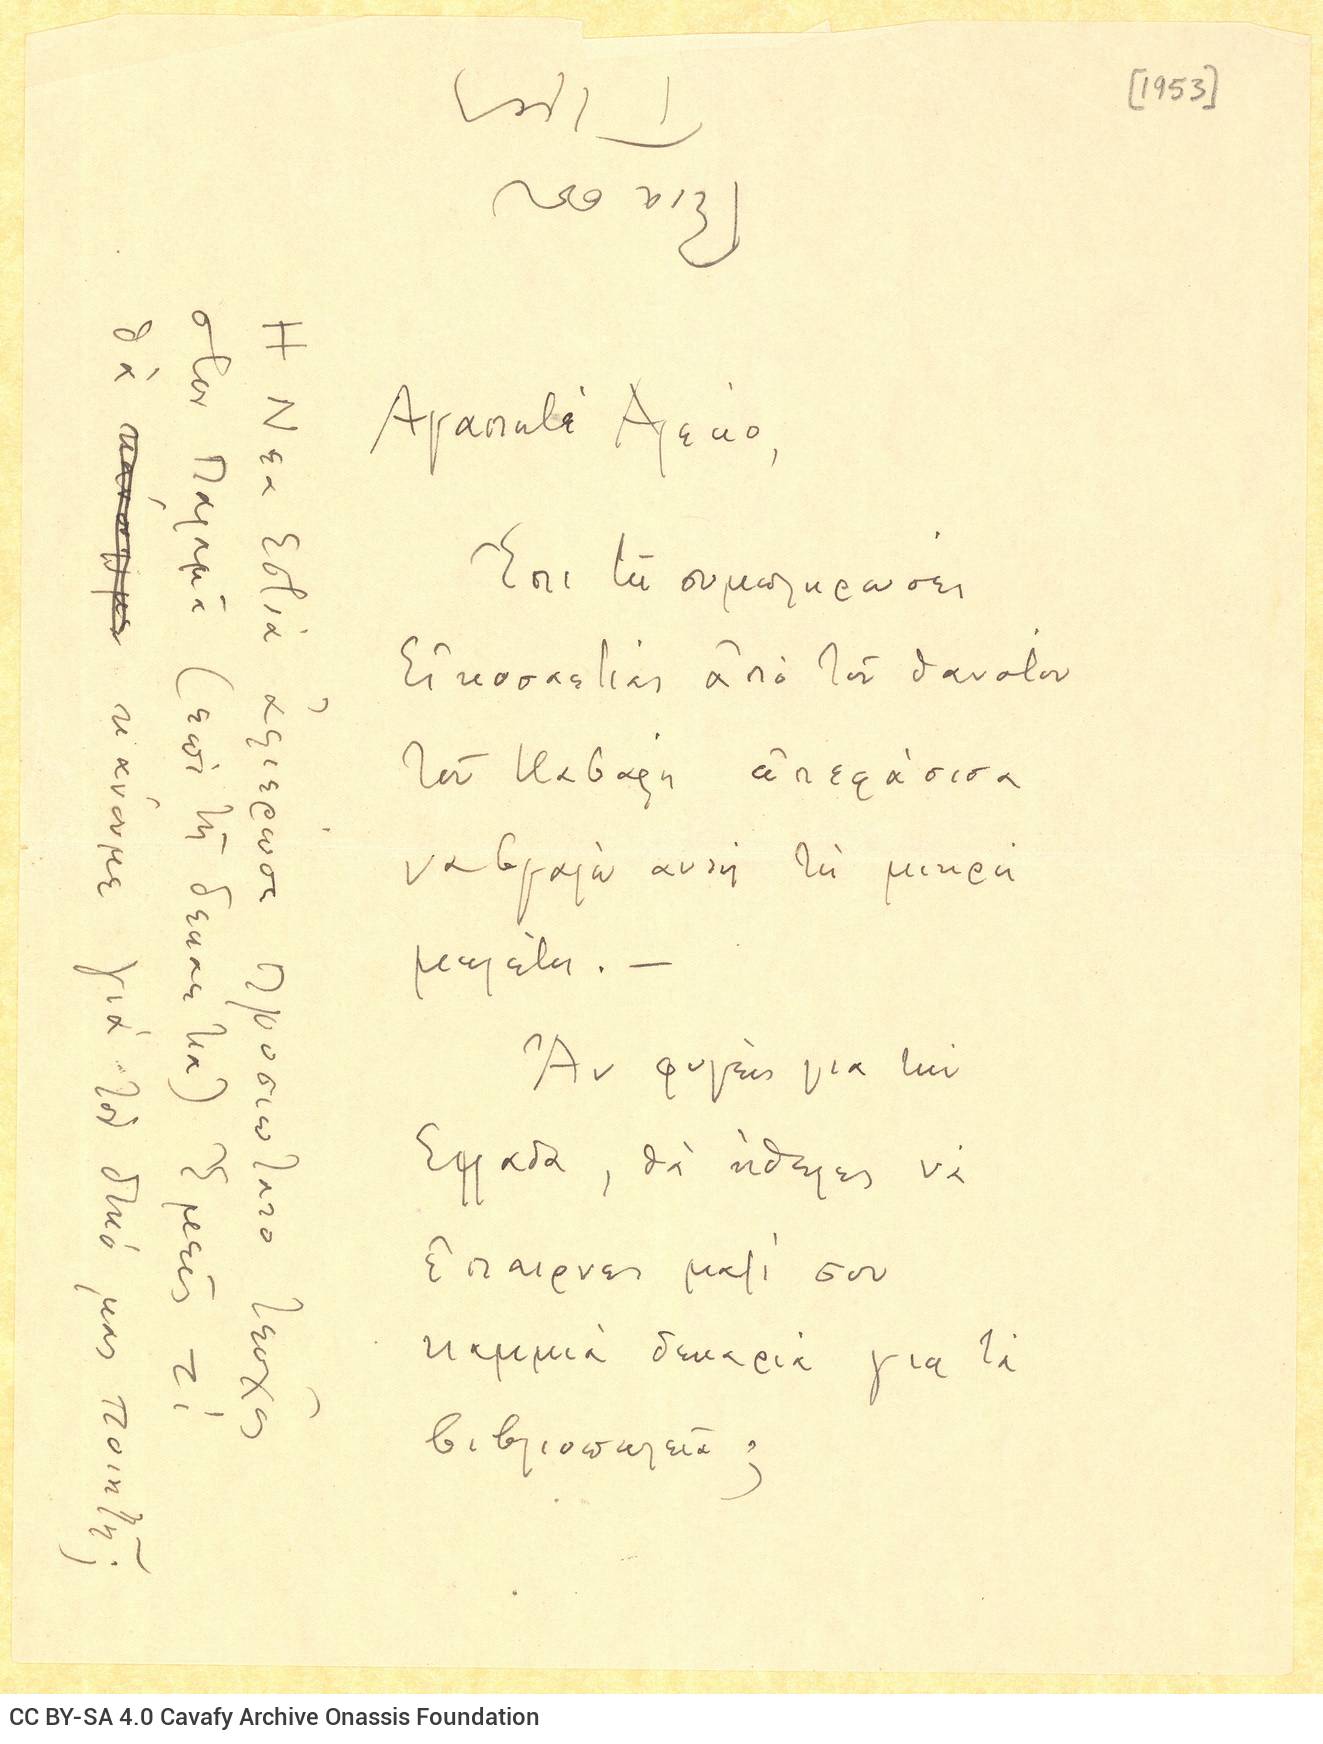 Handwritten letter by Timos Malanos to Alekos Singopoulo, on one side of a sheet. Blank verso. The sender informs about the p